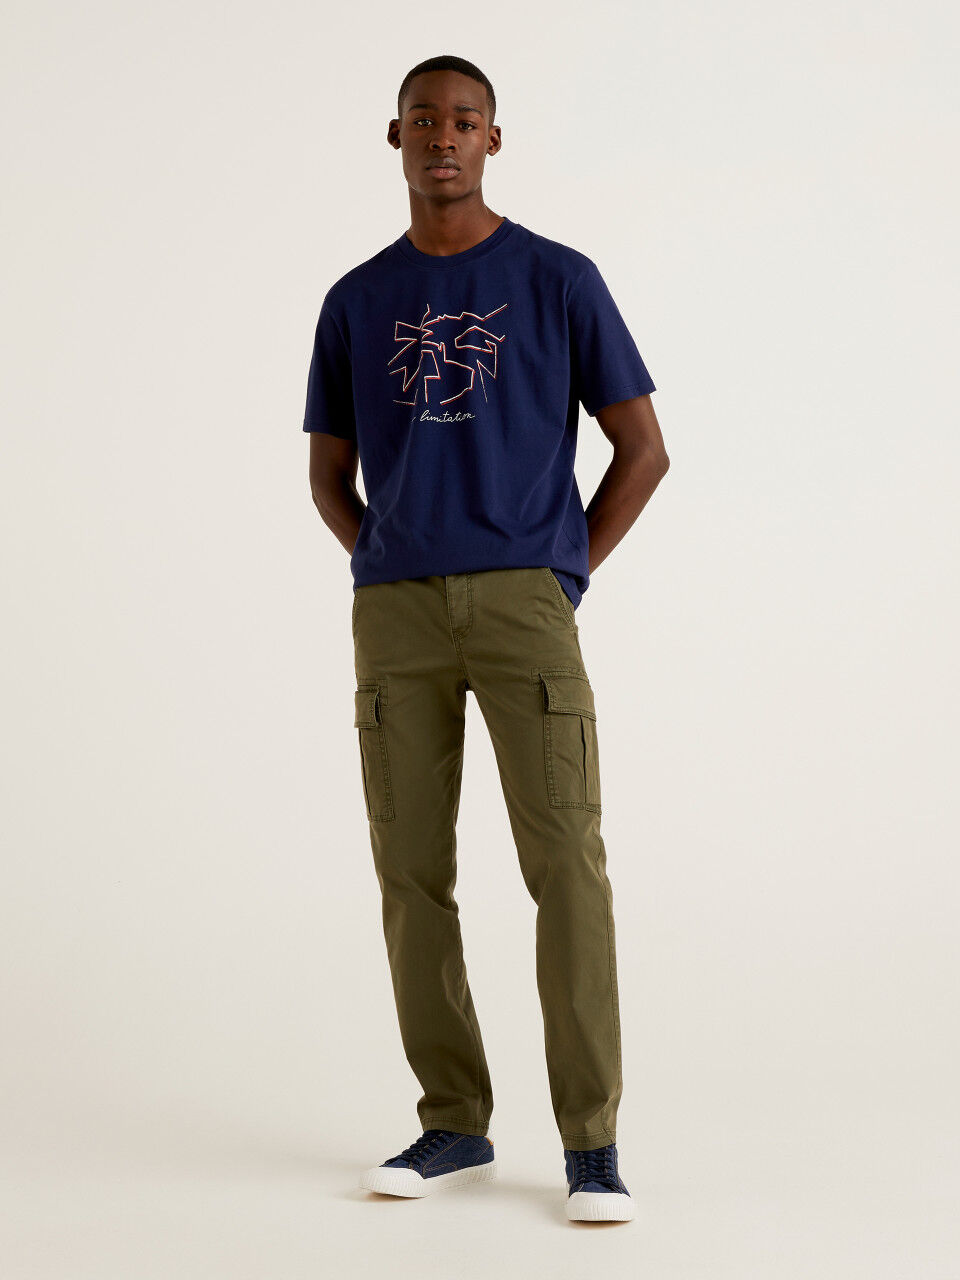 Buy Olive Trousers & Pants for Men by SNITCH Online | Ajio.com